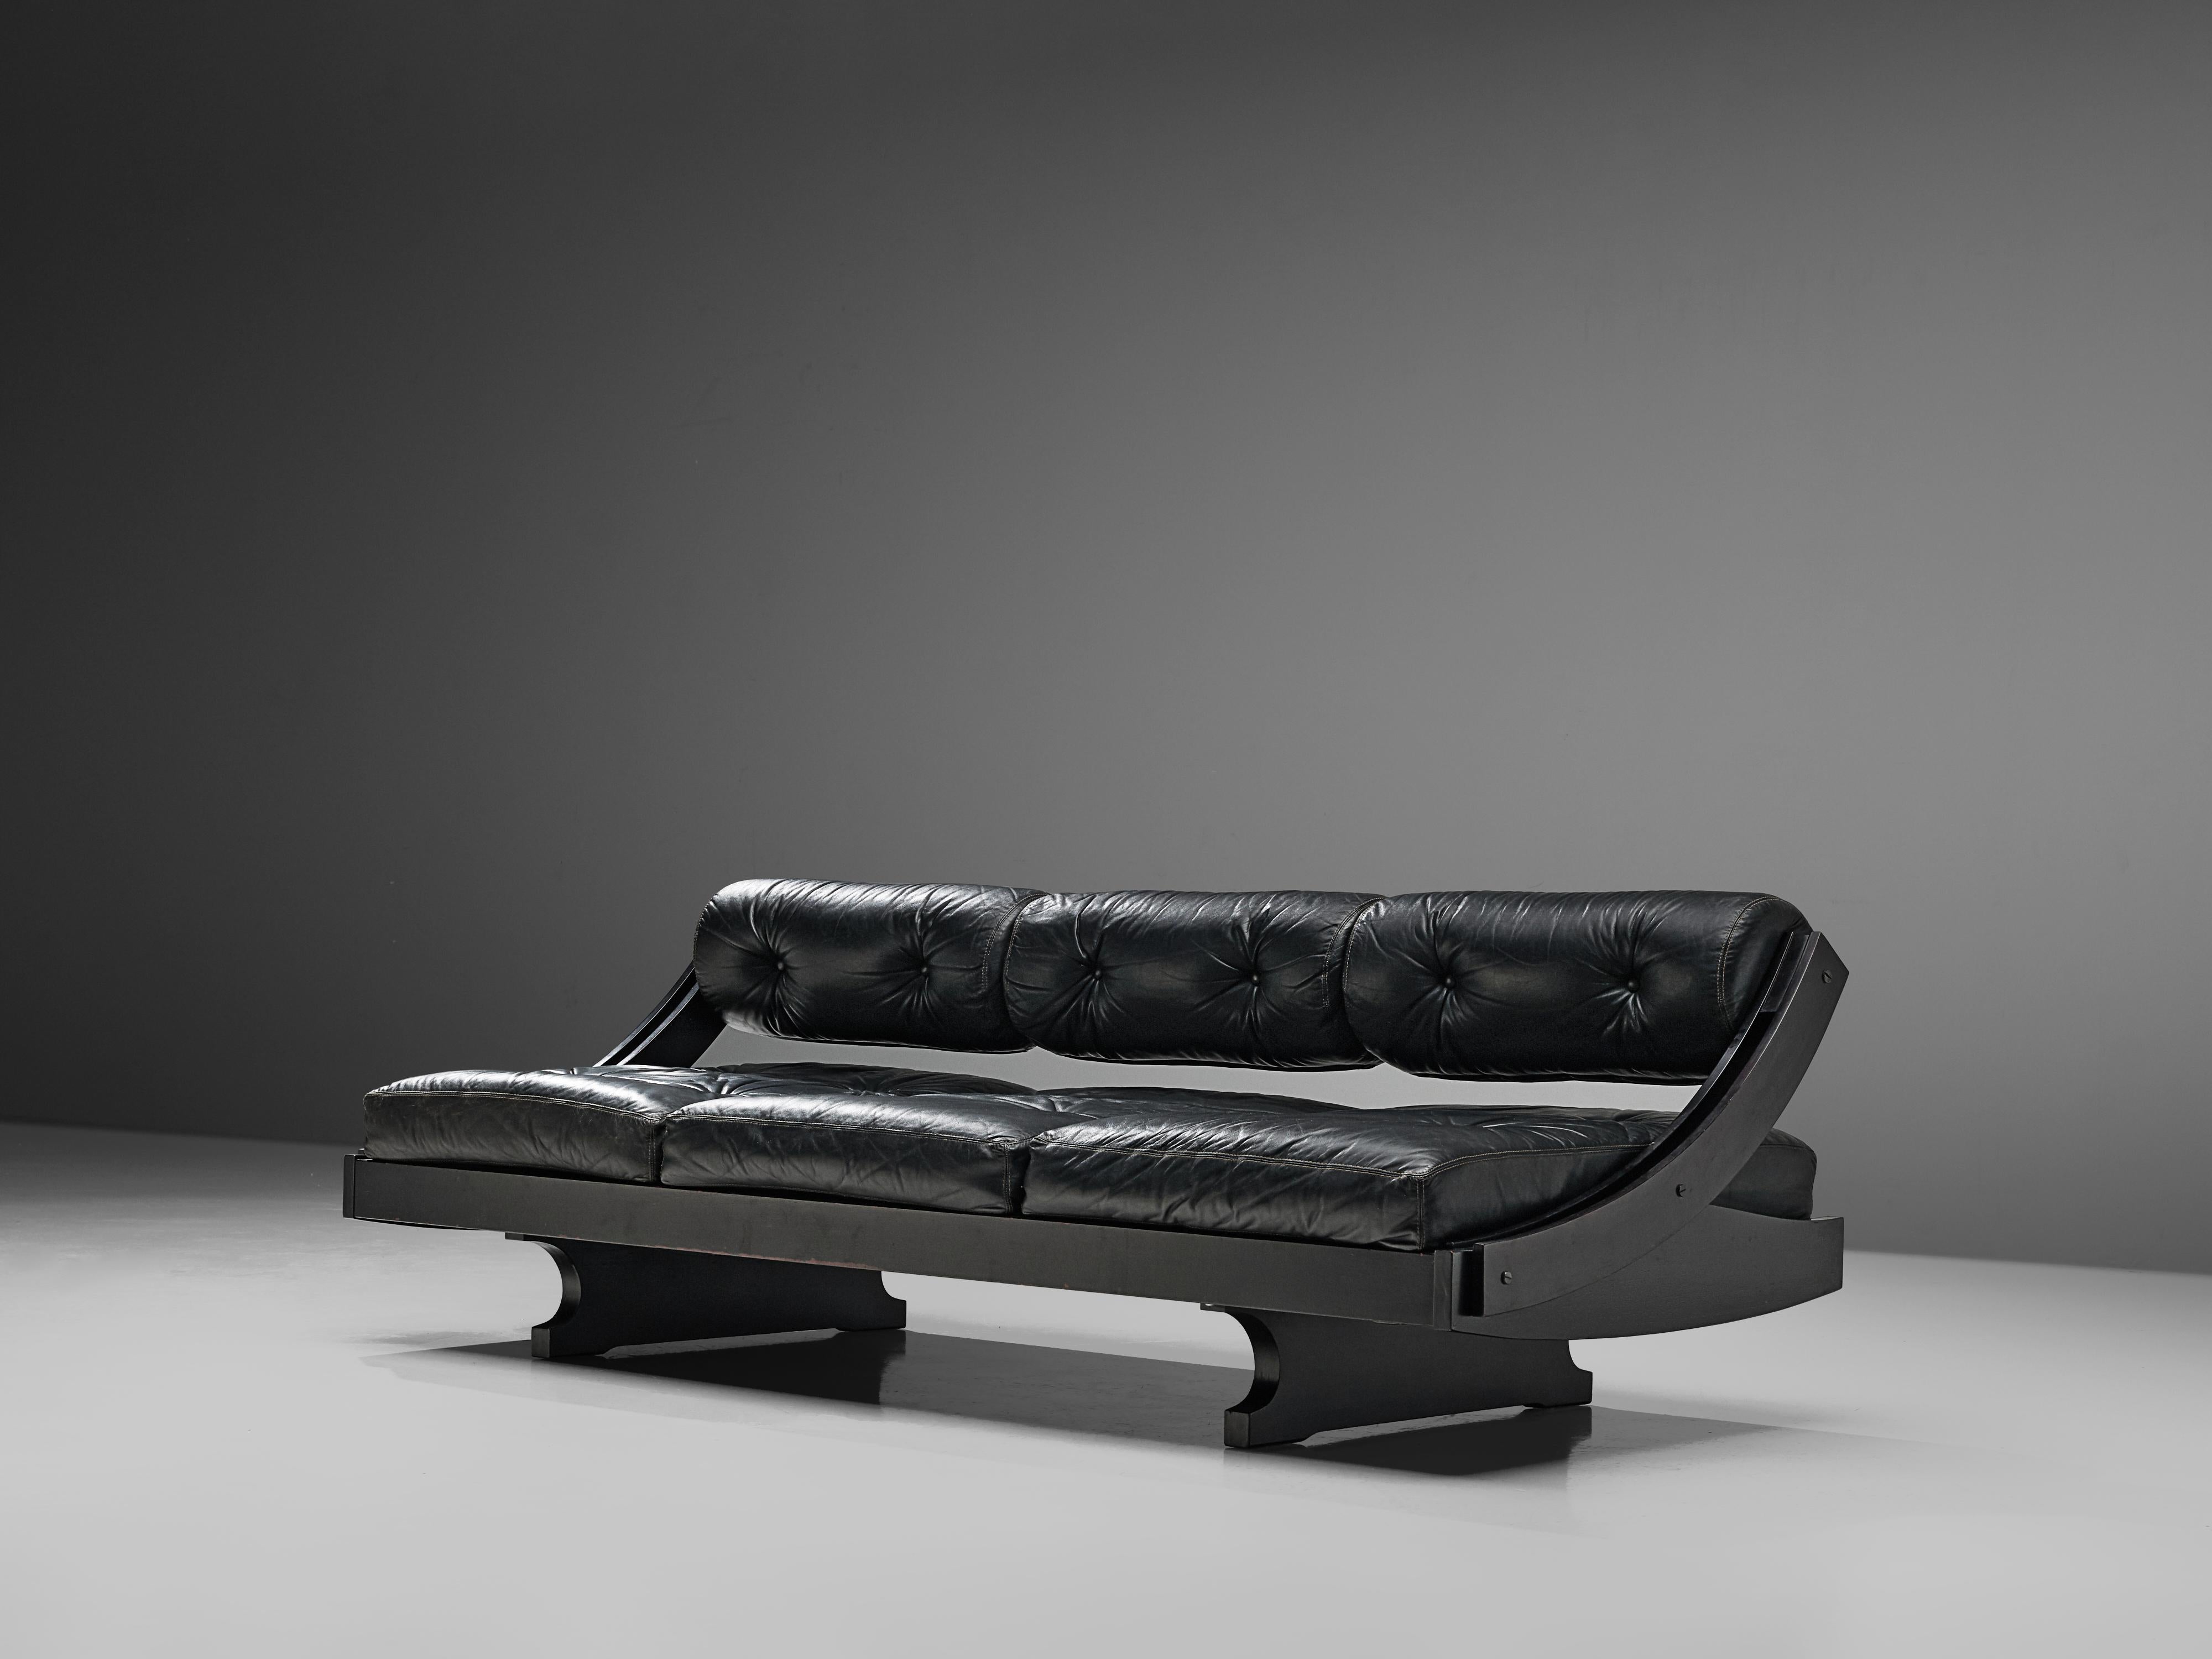 Gianni Songia for Sormani, sofa or daybed model 'GS-195', leather, lacquered wood, Italy, 1963.

Very elegant and organic frame with lush cushions upholstered in black leather. The sofa could be converted into a daybed via a sliding backrest. The